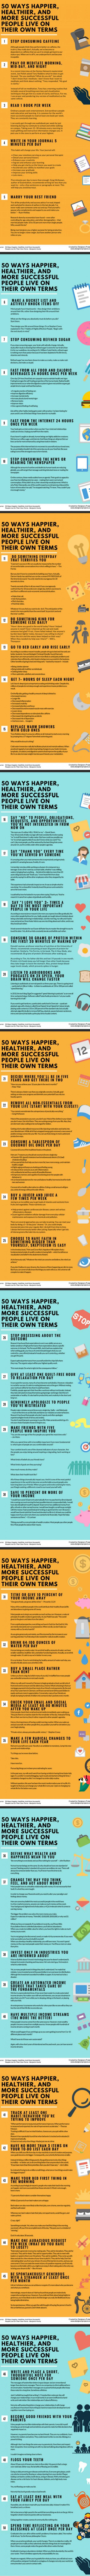 50 Ways Successful People Live On Their Own Terms.